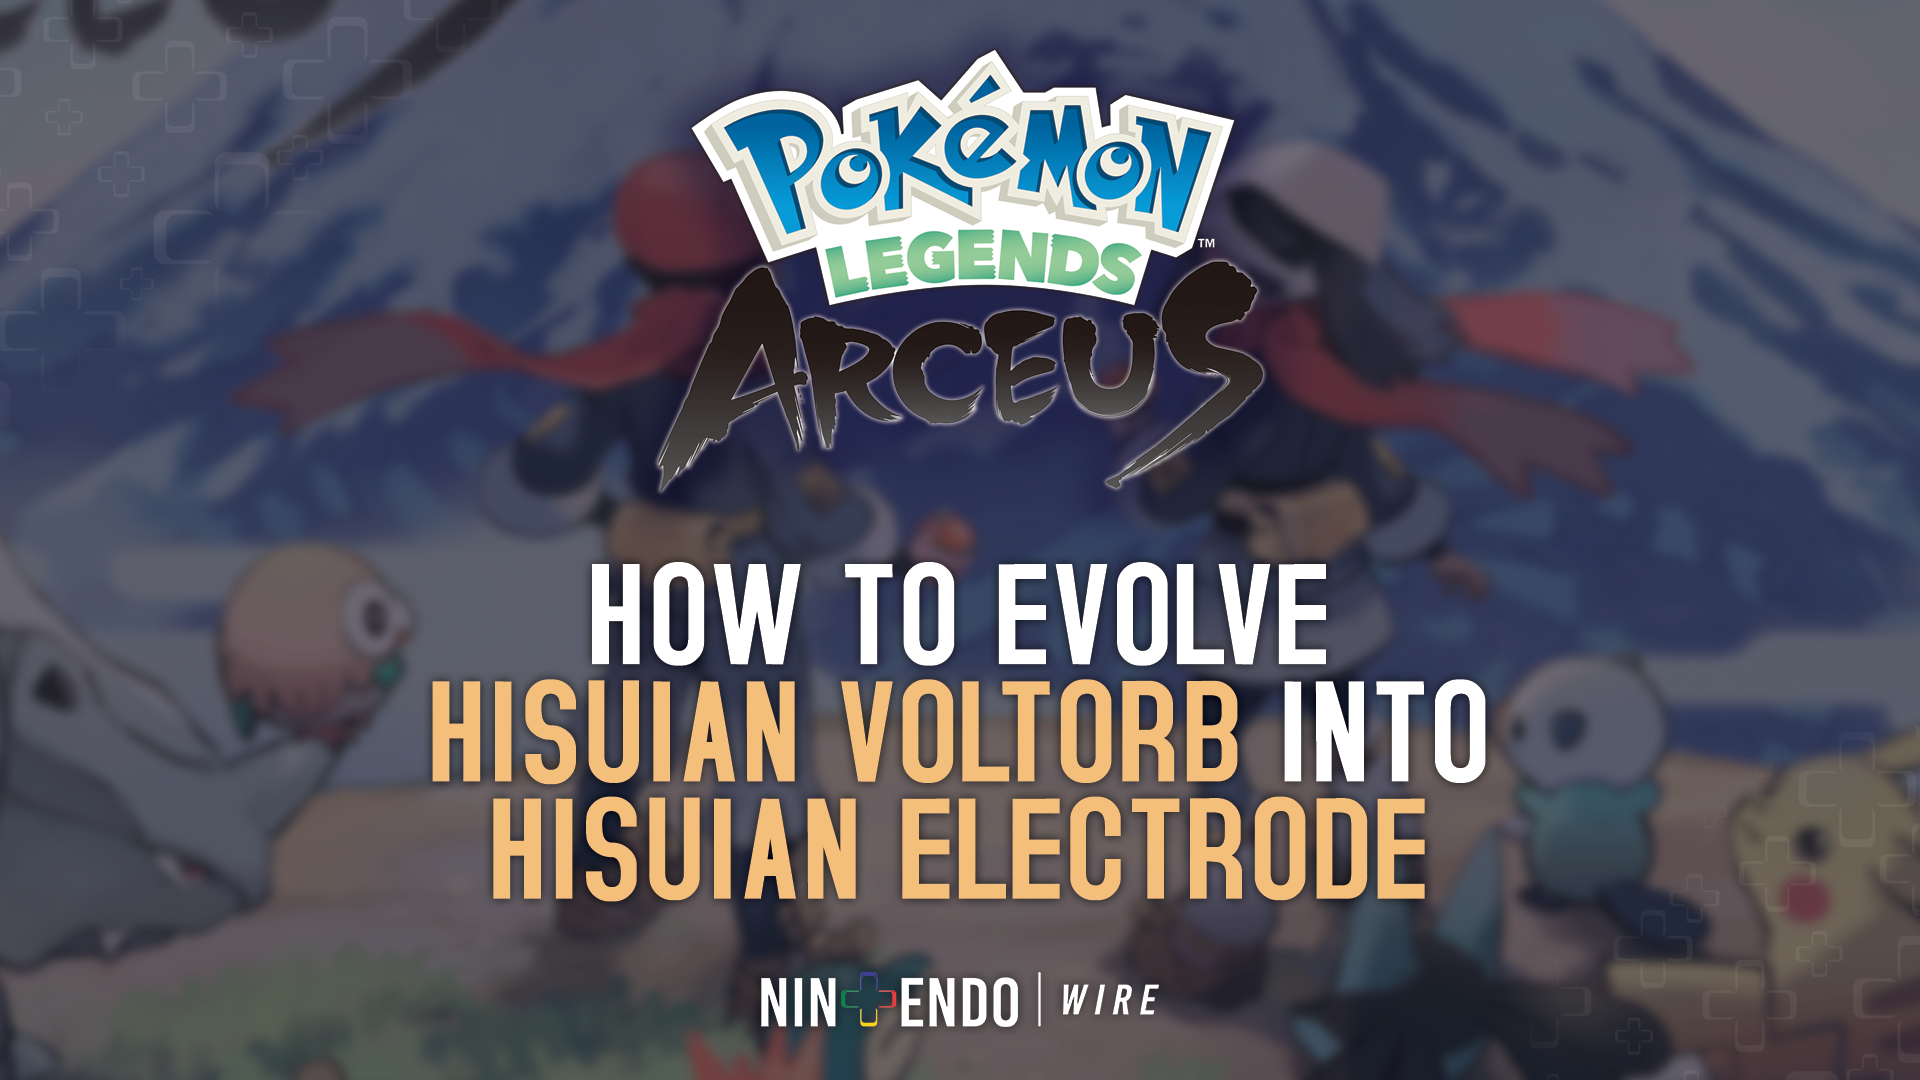 Bulbagarden - The original Pokémon community on X: Now THAT'S an  interesting typing! If Hisuian Voltorb's evolution has stats similar to  Kantonian Electrode, it'll be the fastest Grass-type we've seen yet!   /